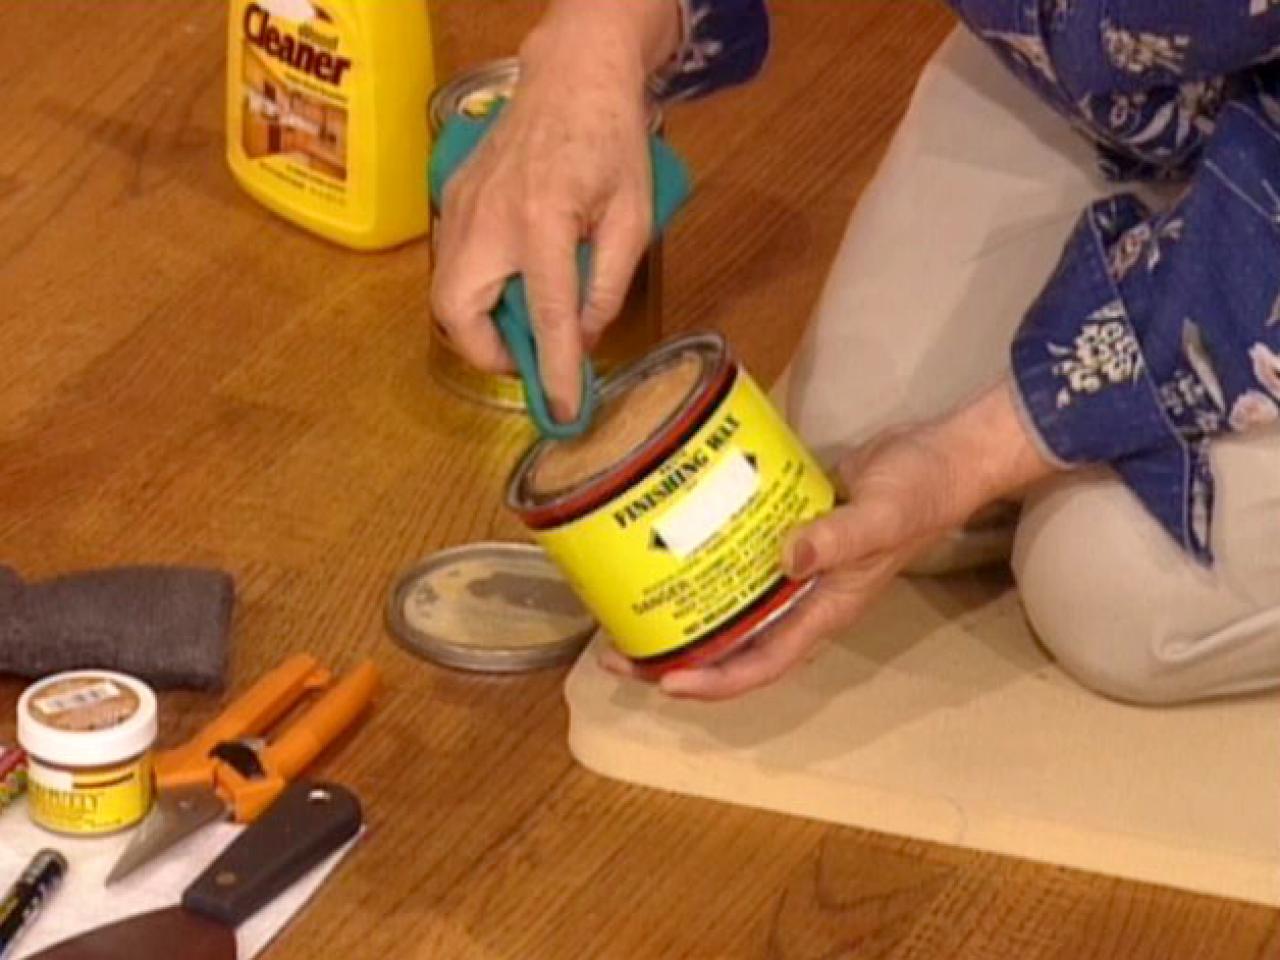 How To Touch Up Wood Floors Tos Diy, How To Wax Old Hardwood Floors